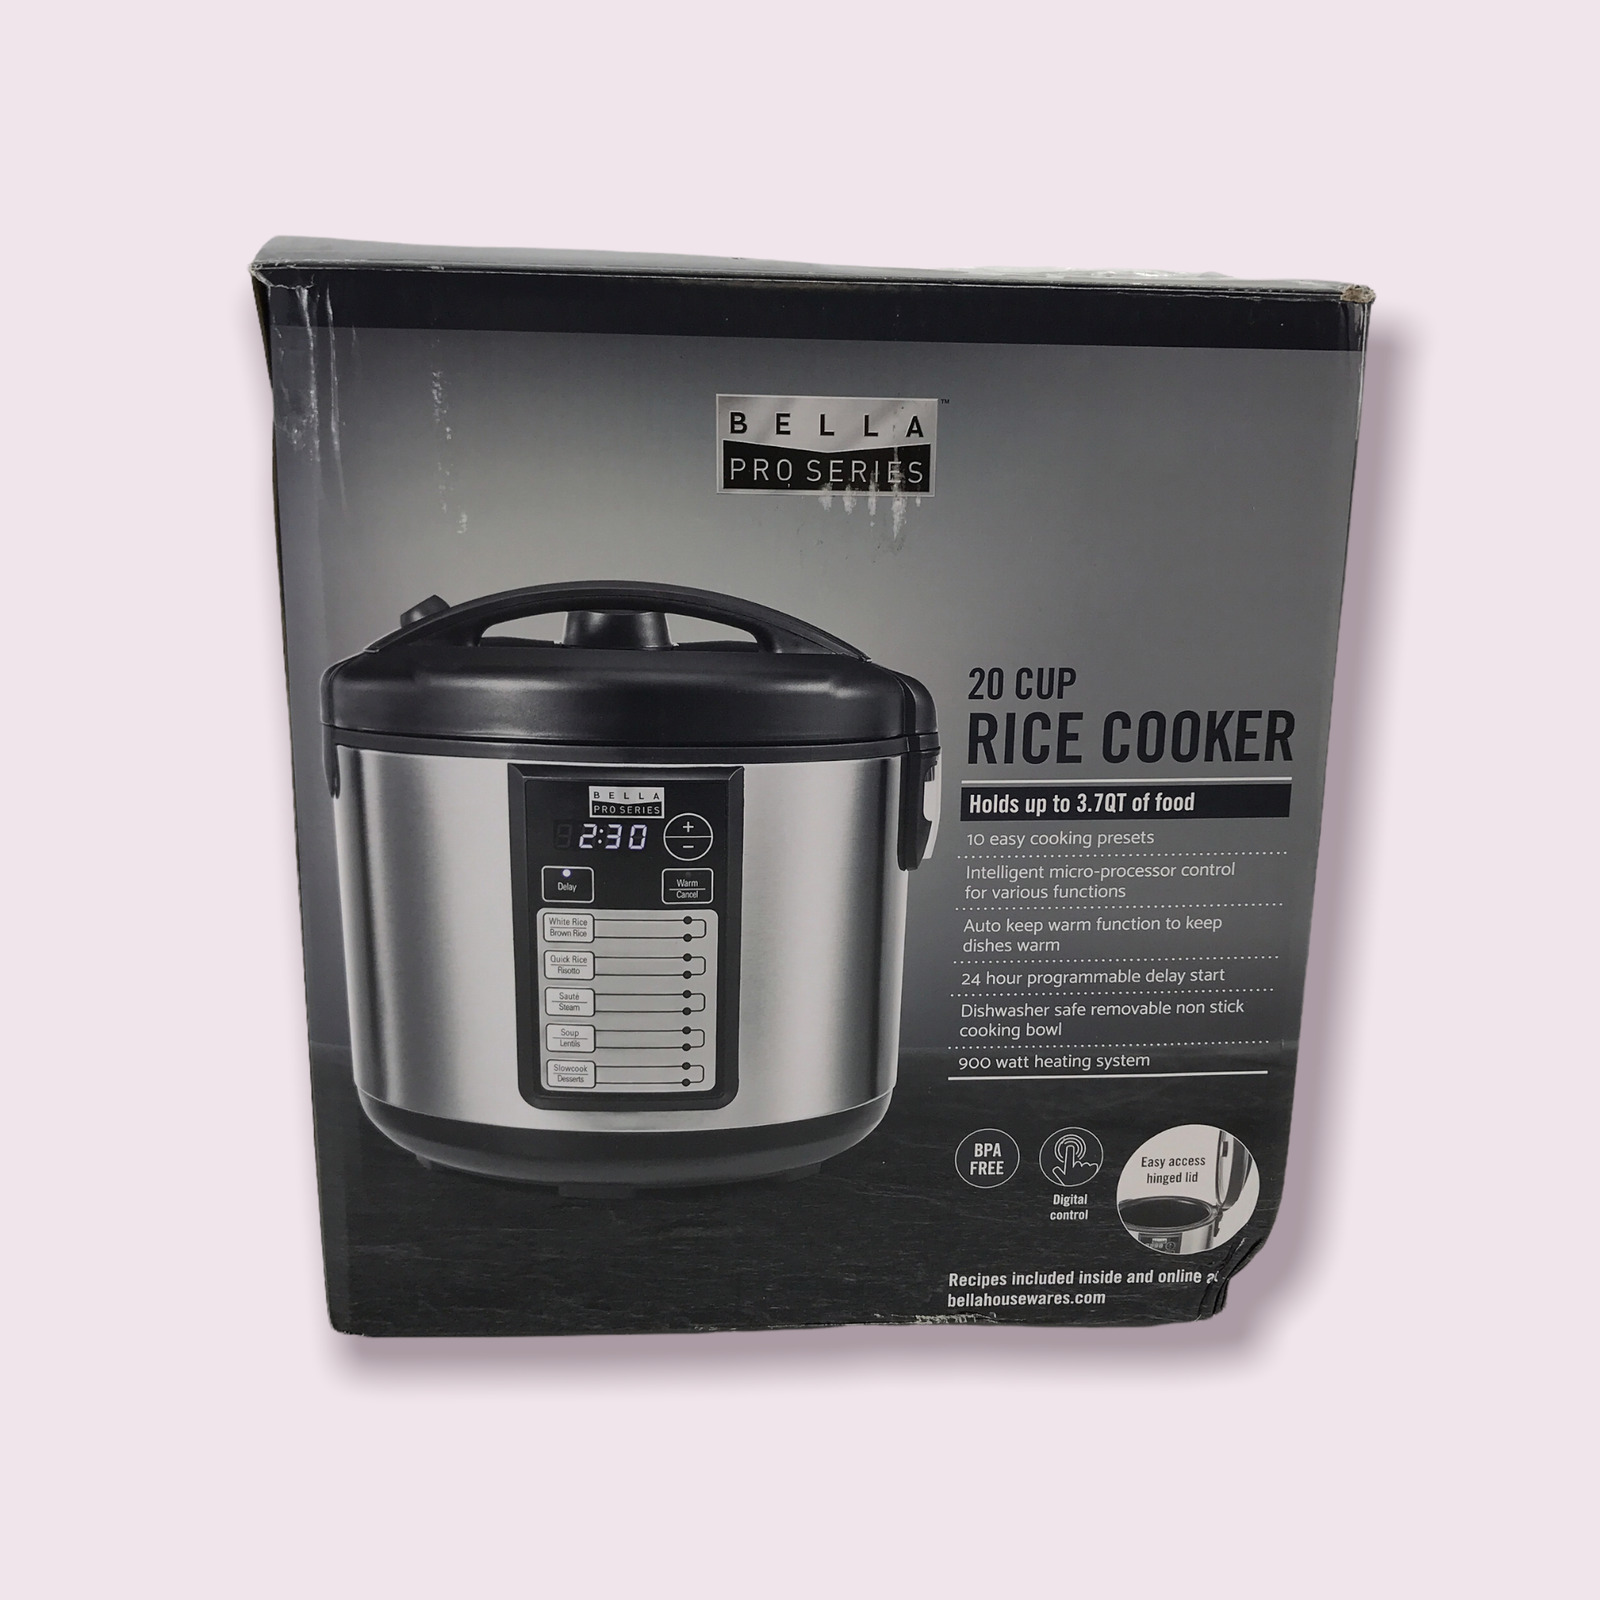 Bella Pro Series - Pro Series 20-Cup Rice Cooker - Stainless Steel ON SALE AT BEST BUY!